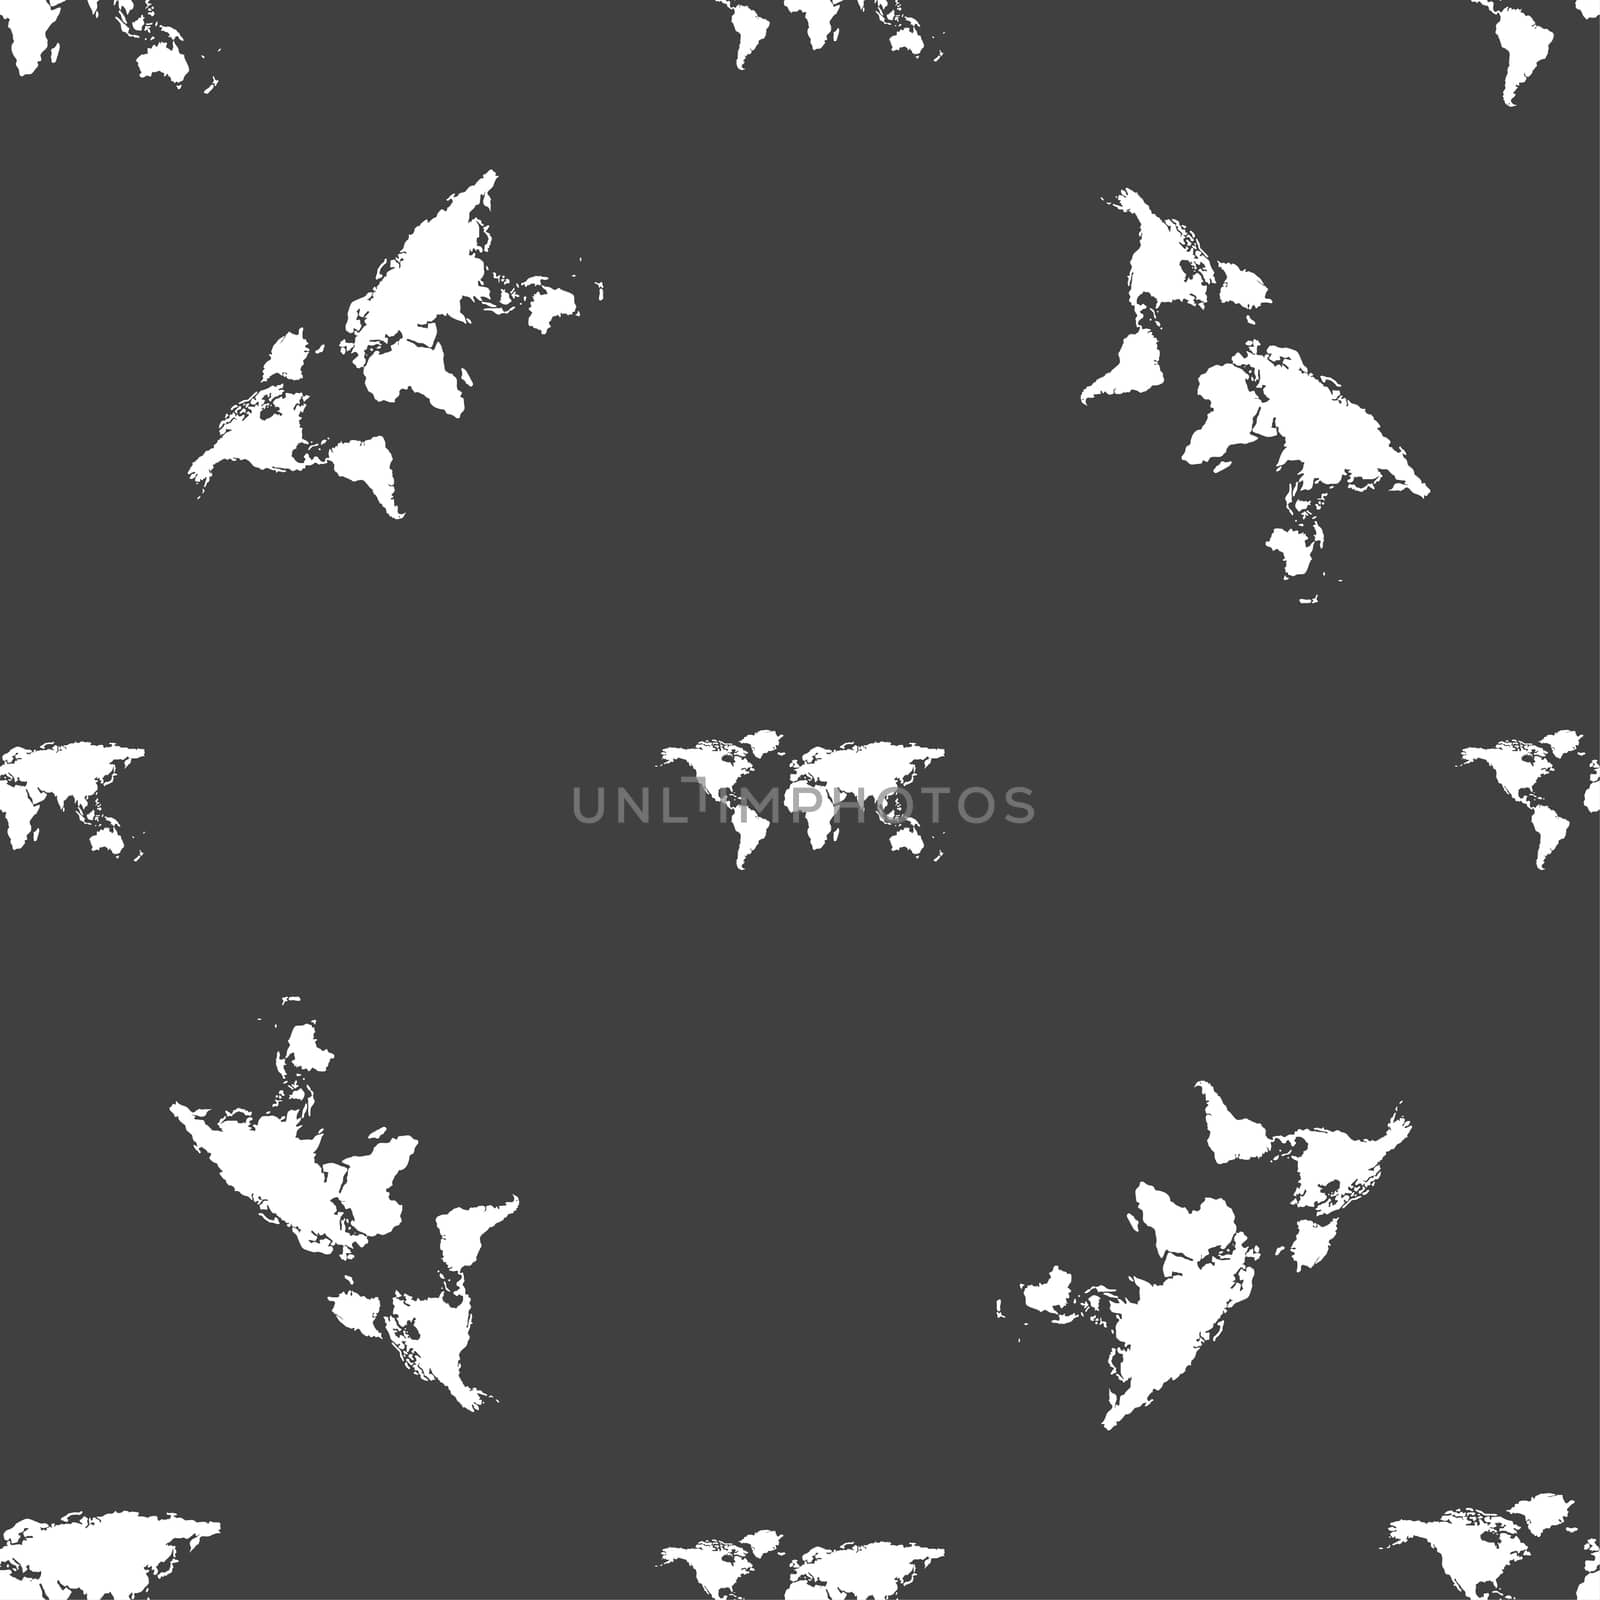 Globe sign icon. World map geography symbol. Seamless pattern on a gray background. illustration